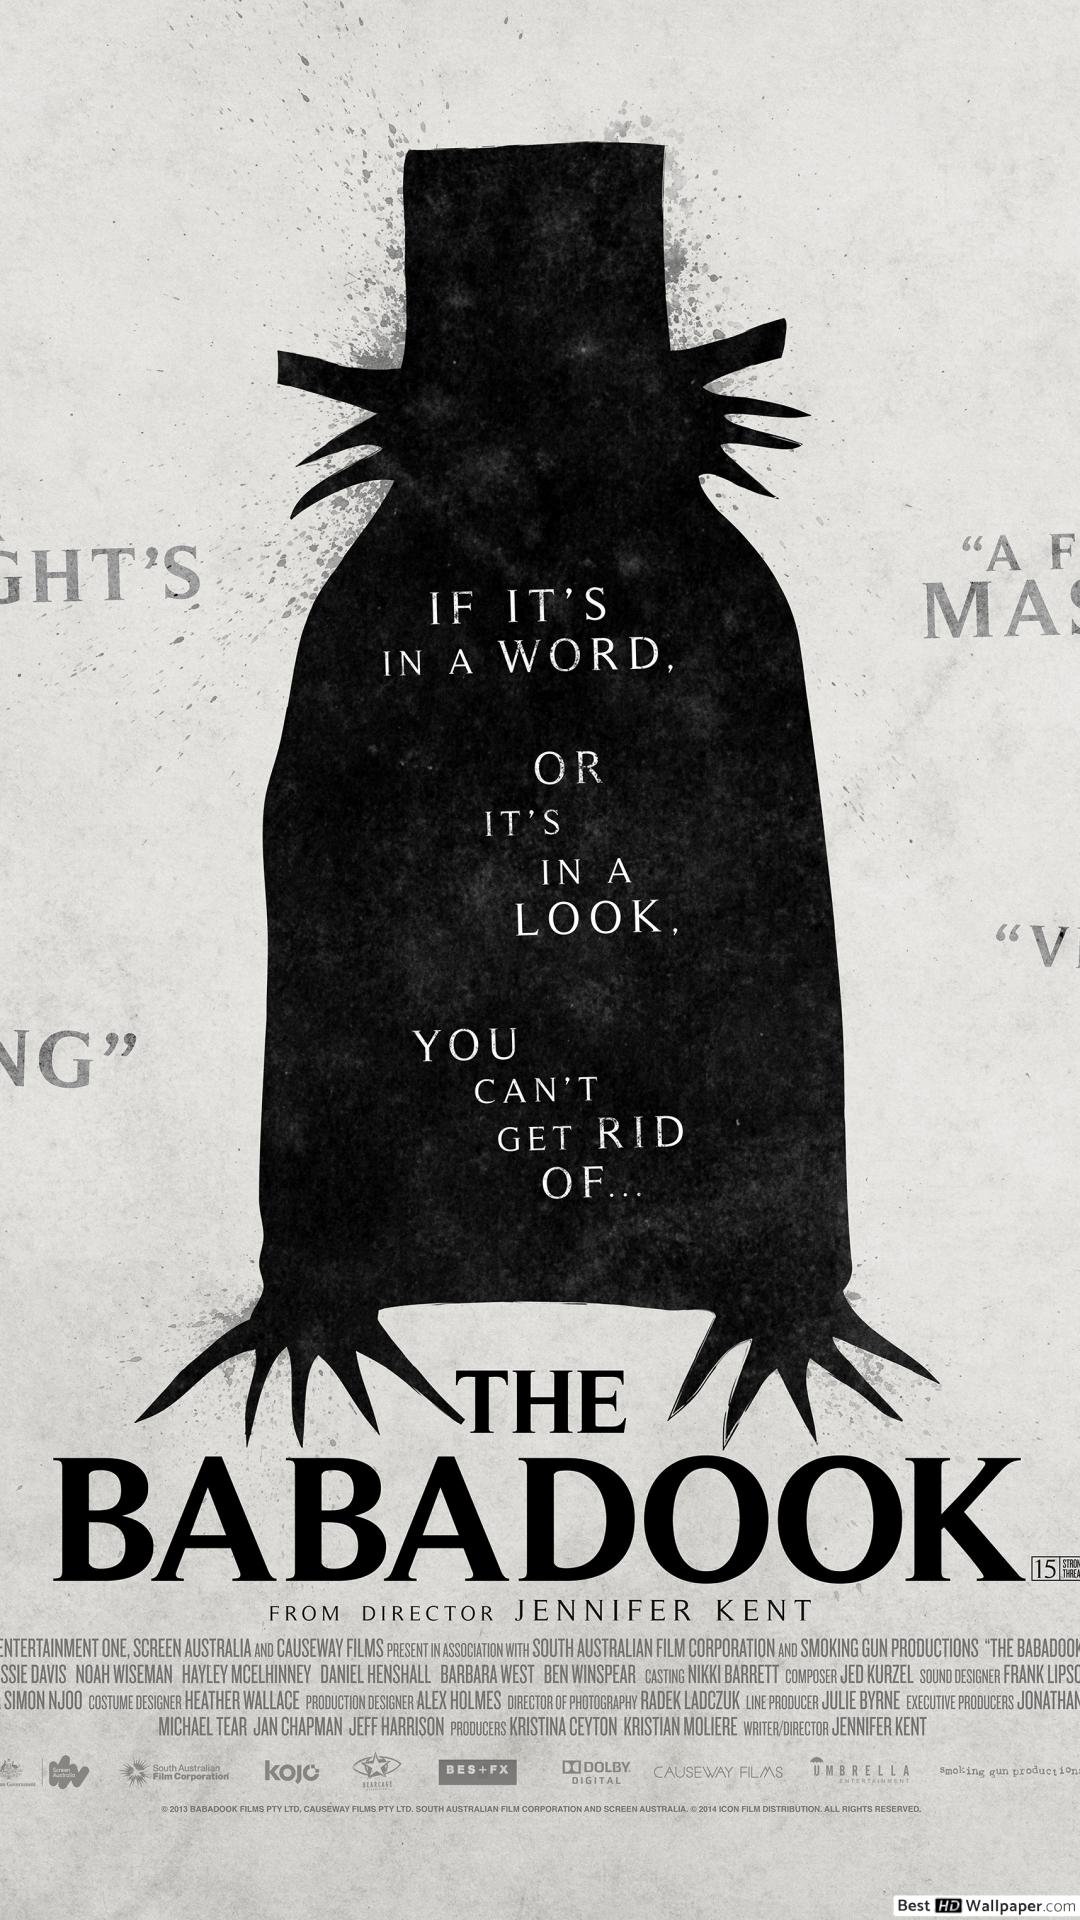 The babadook HD wallpaper download